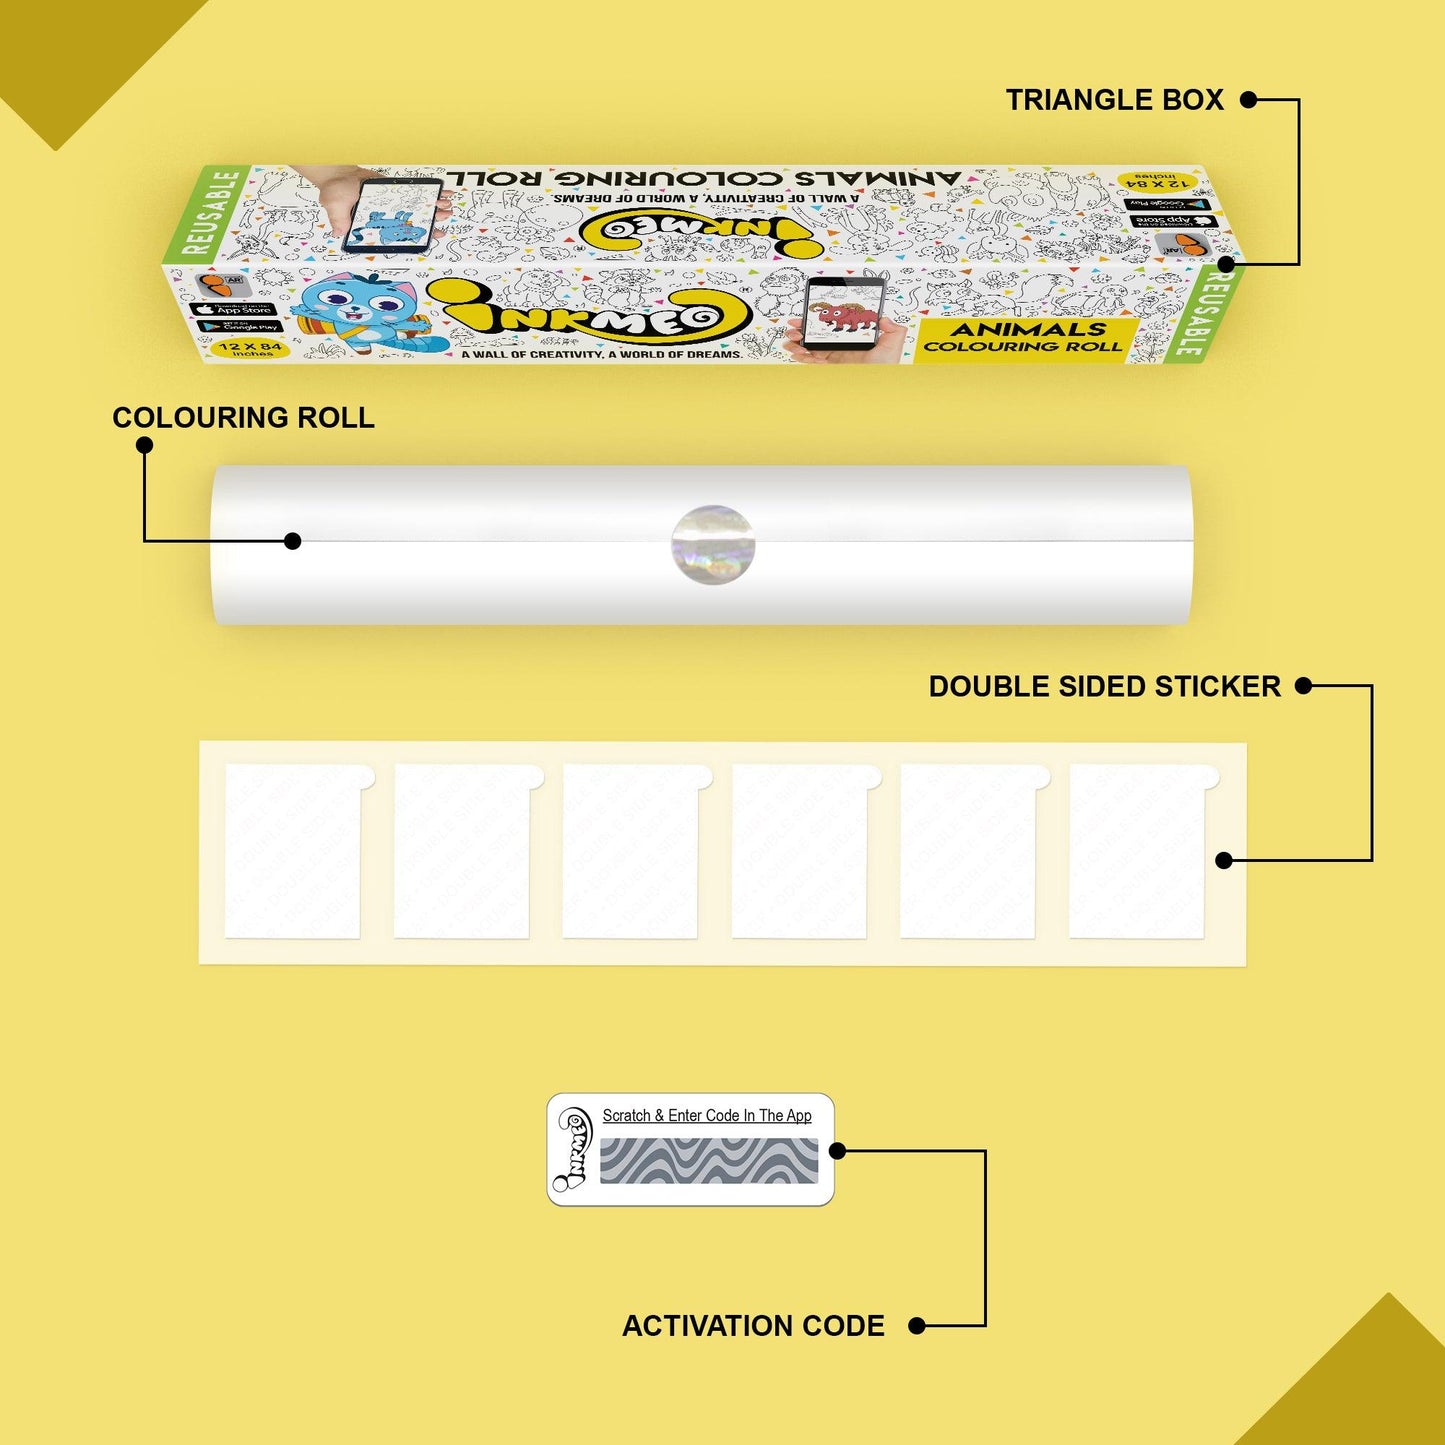 The image depicts a yellow background with a single triangular box, a coloring roll, 6 double-sided stickers, 12 colored crayons, and an activation code